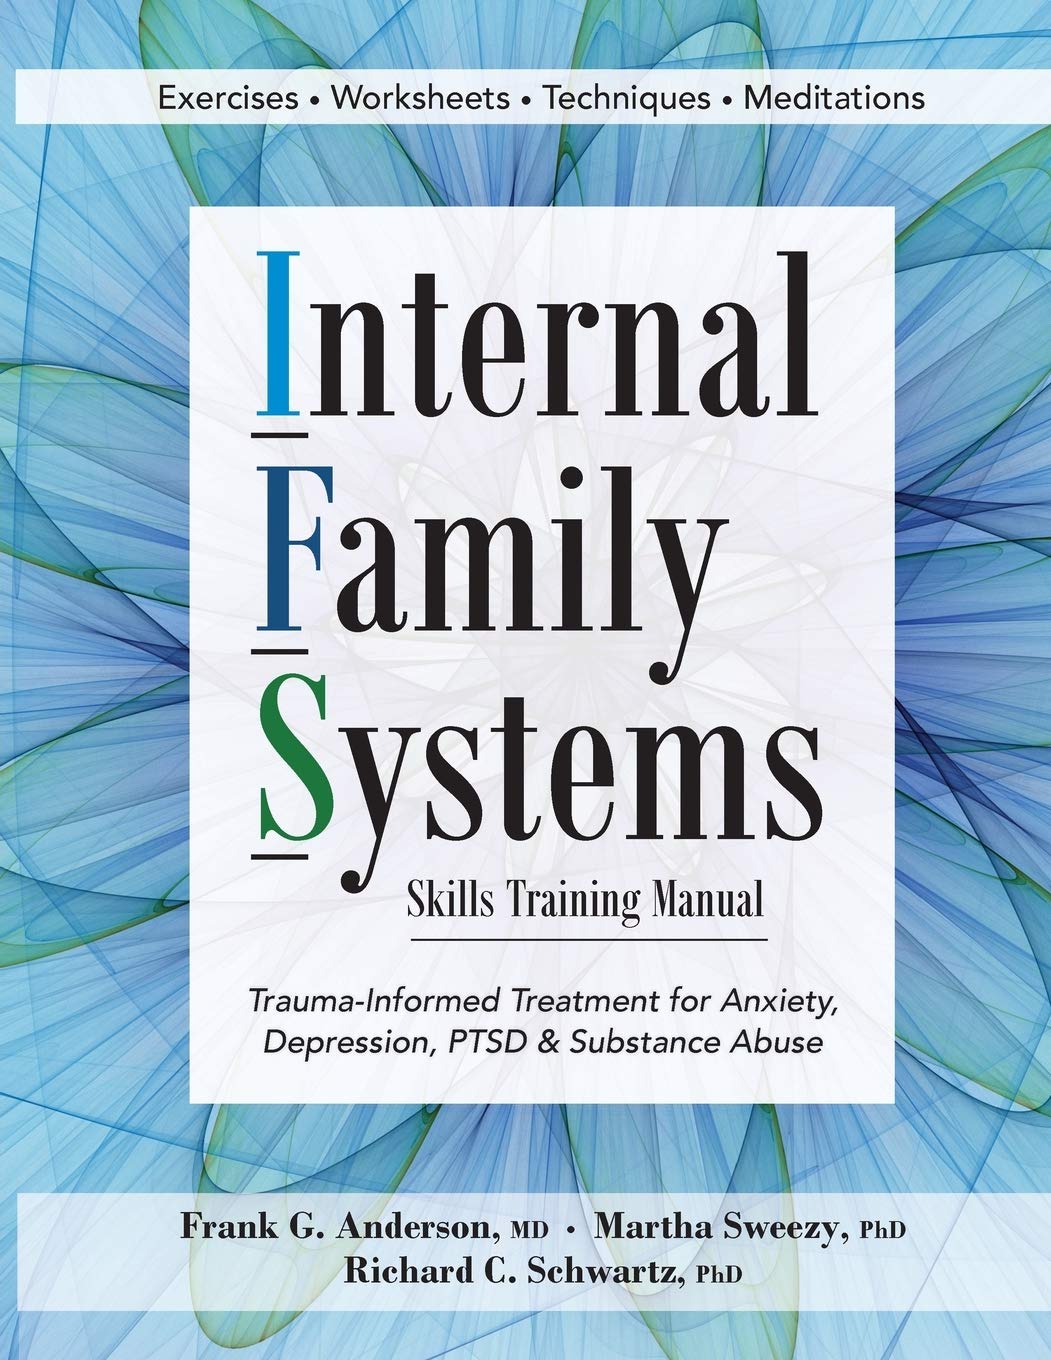 Internal Family Systems (IFS) for Trauma, Anxiety, Depression, Addiction & More: An intensive online course with Dr. Richard Schwartz & Dr. Frank Anderson - Daniel J. Siegel , Frank G. Anderson & Richard C. Schwartz